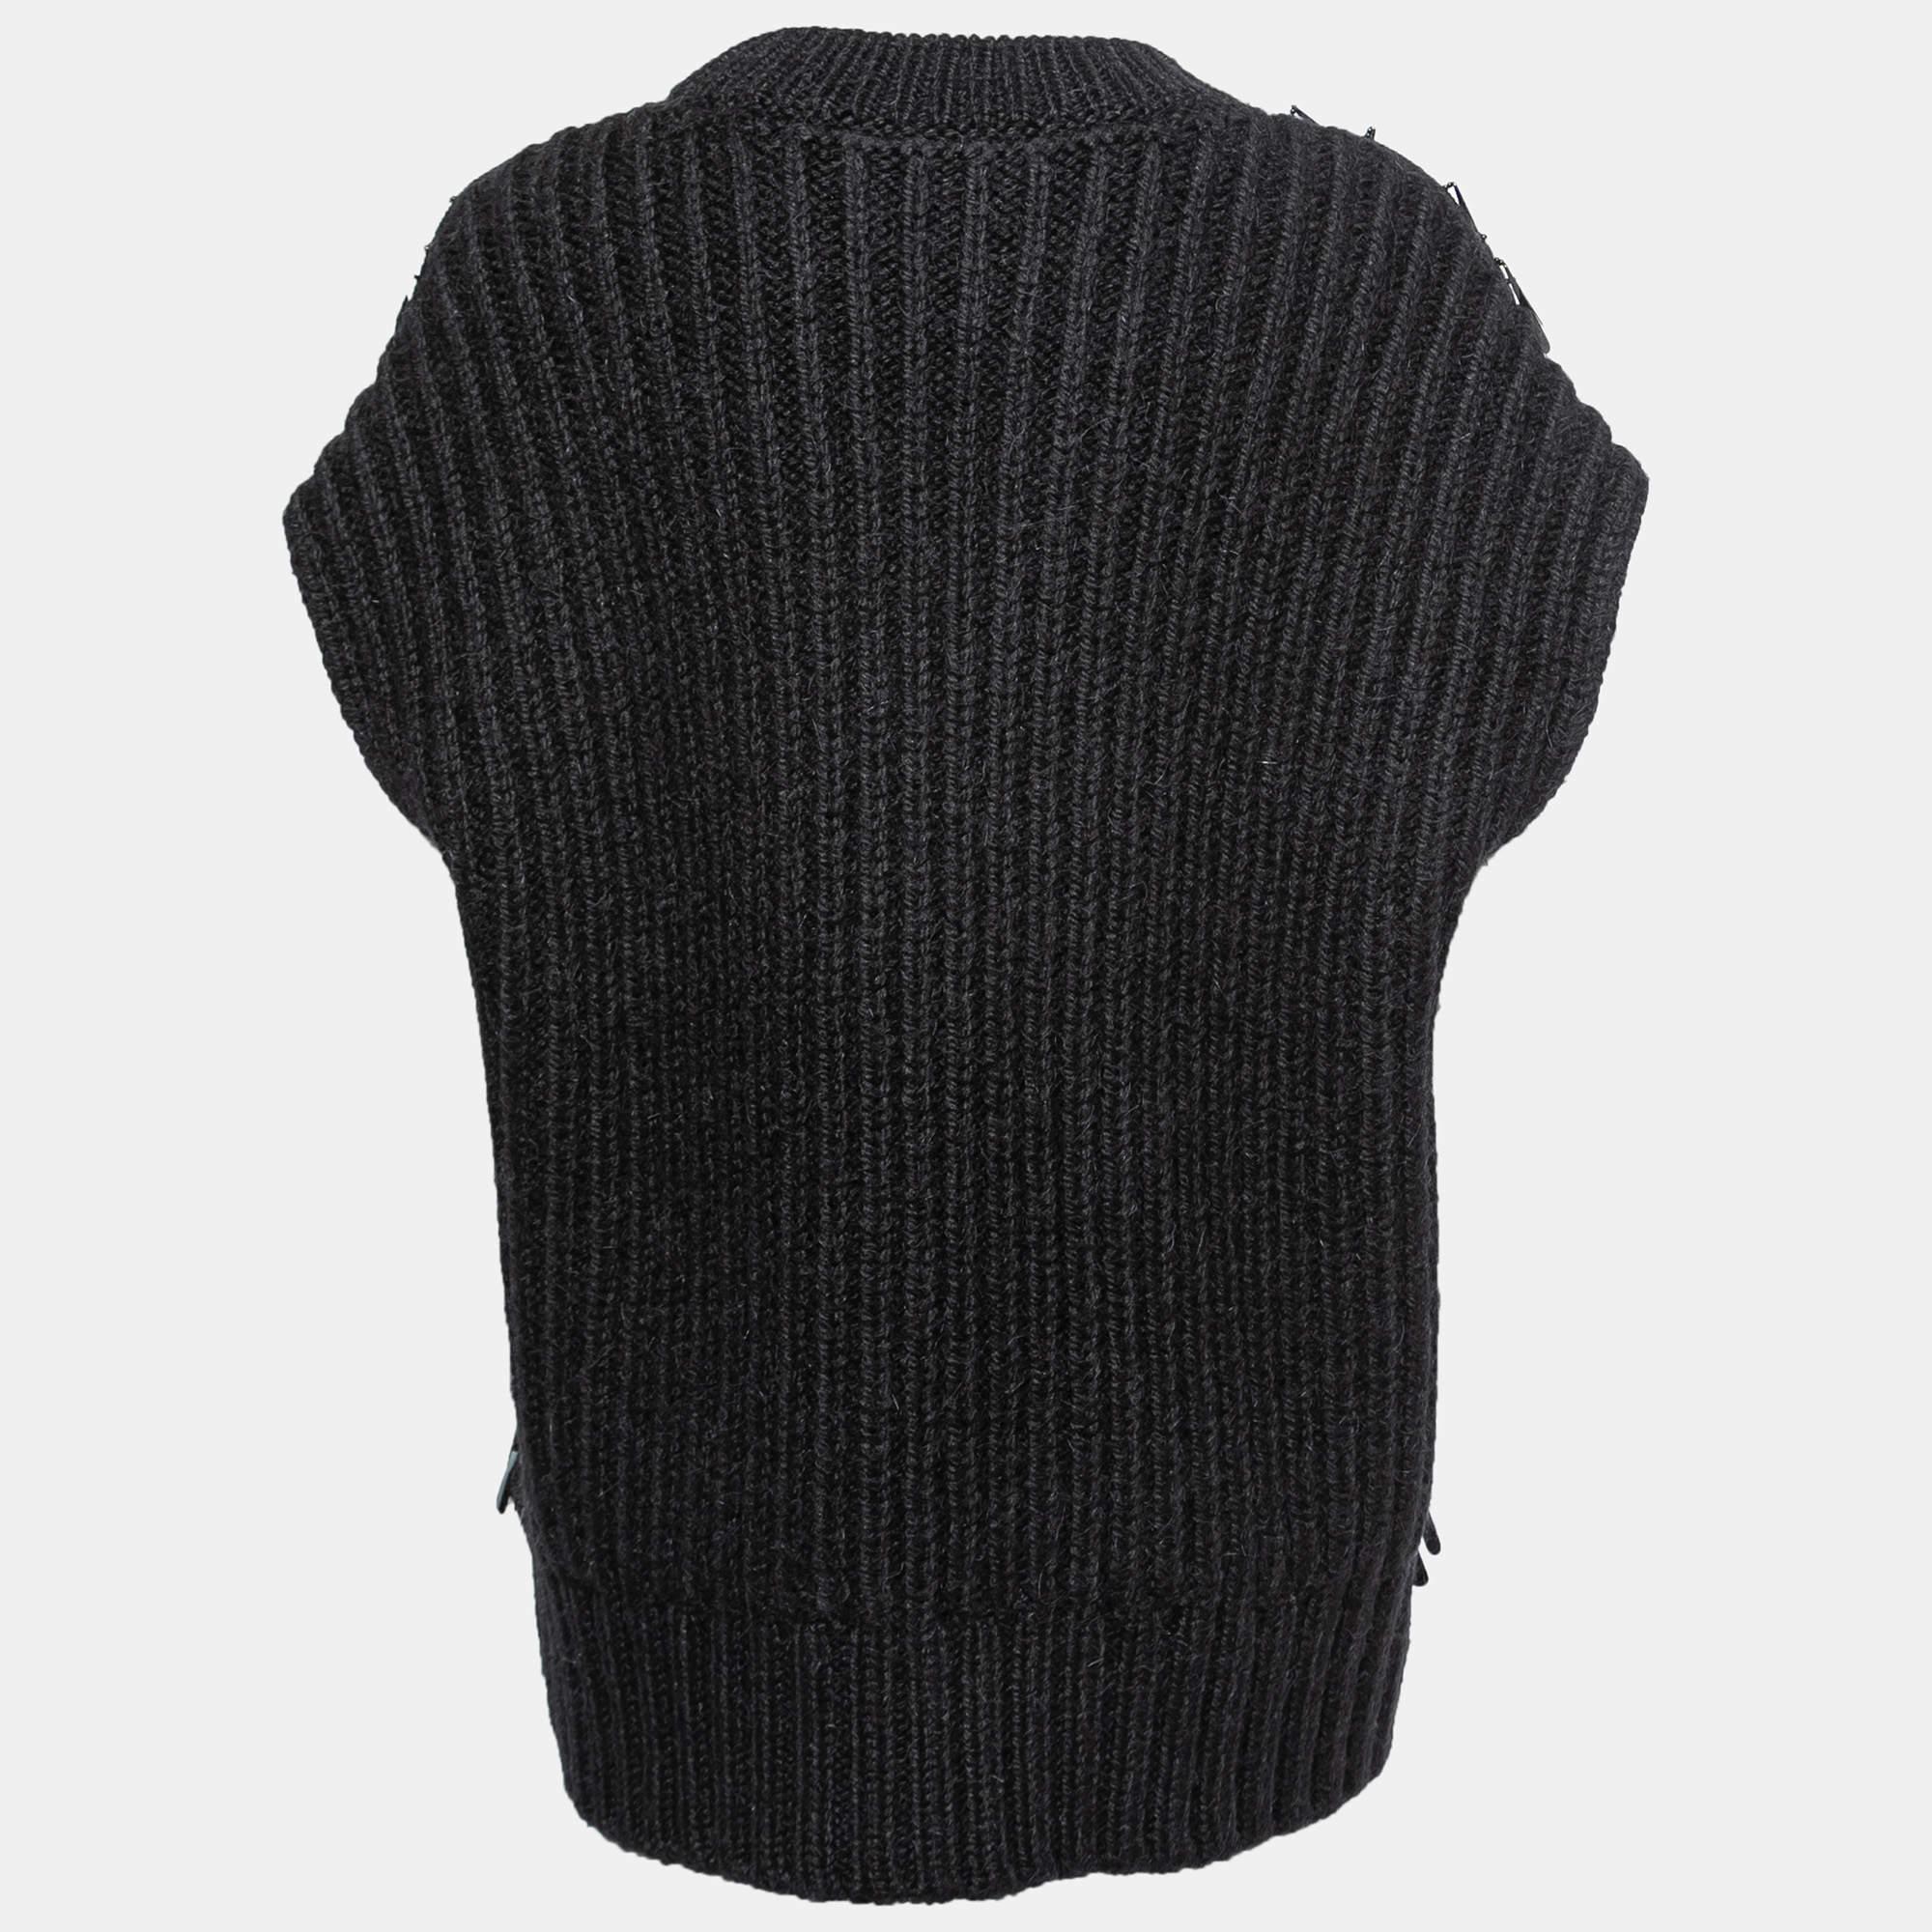 This designer sweater vest is perfect for your casual wear. It is made from quality fabric to give you immense comfort.

